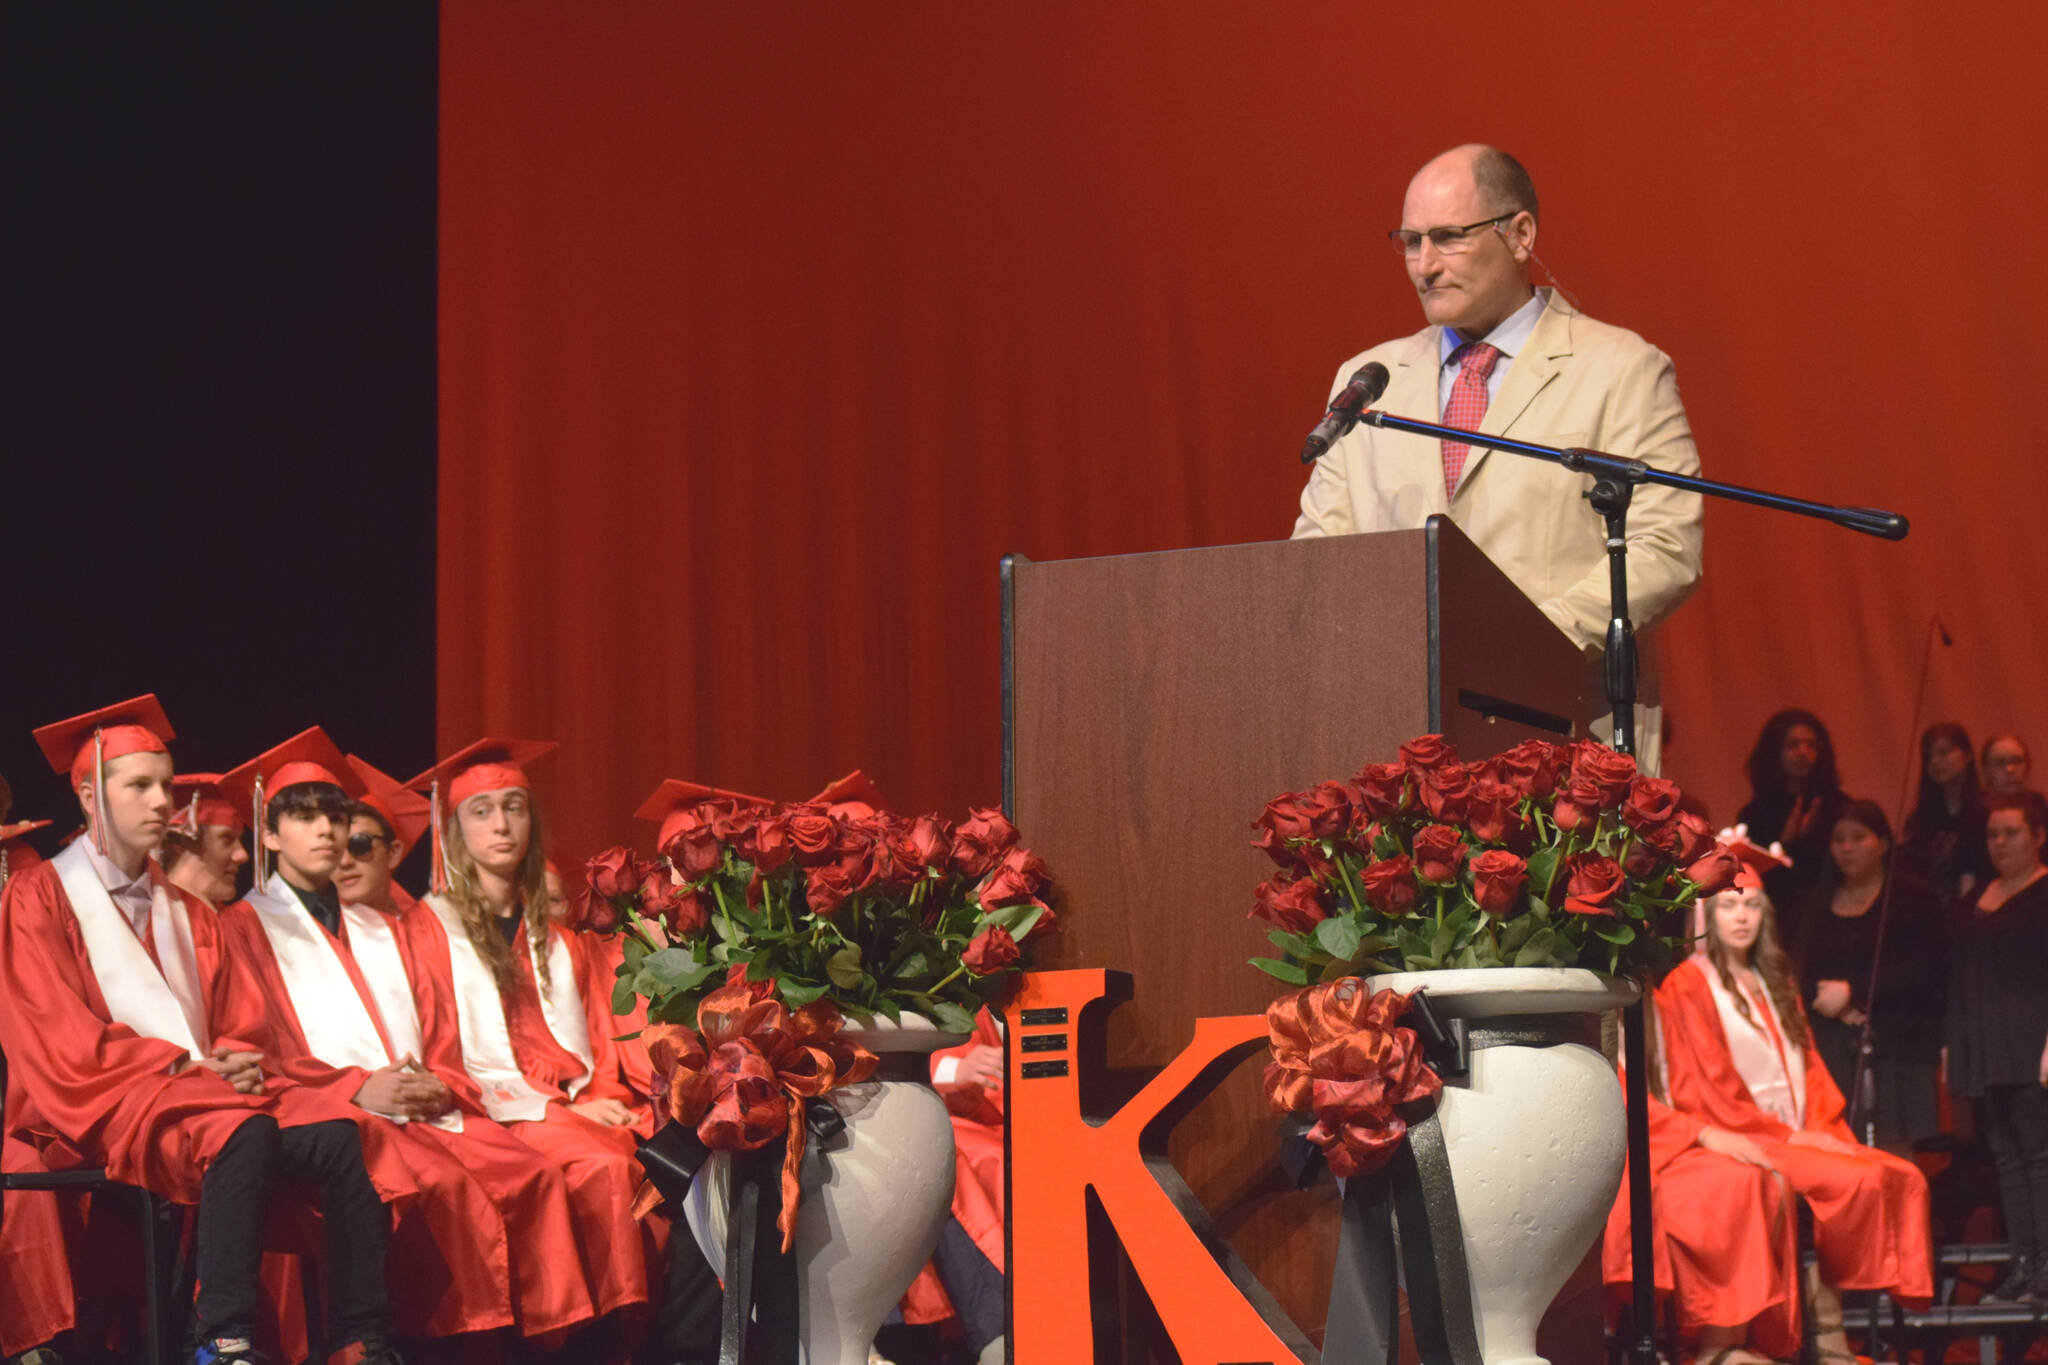 Kenai Central High School Principal Daniel Beck welcomes graduates and attendees to the school’s commencement ceremony on Tuesday, May 17, 2022, in Kenai, Alaska. (Ashlyn O’Hara/Peninsula Clarion)